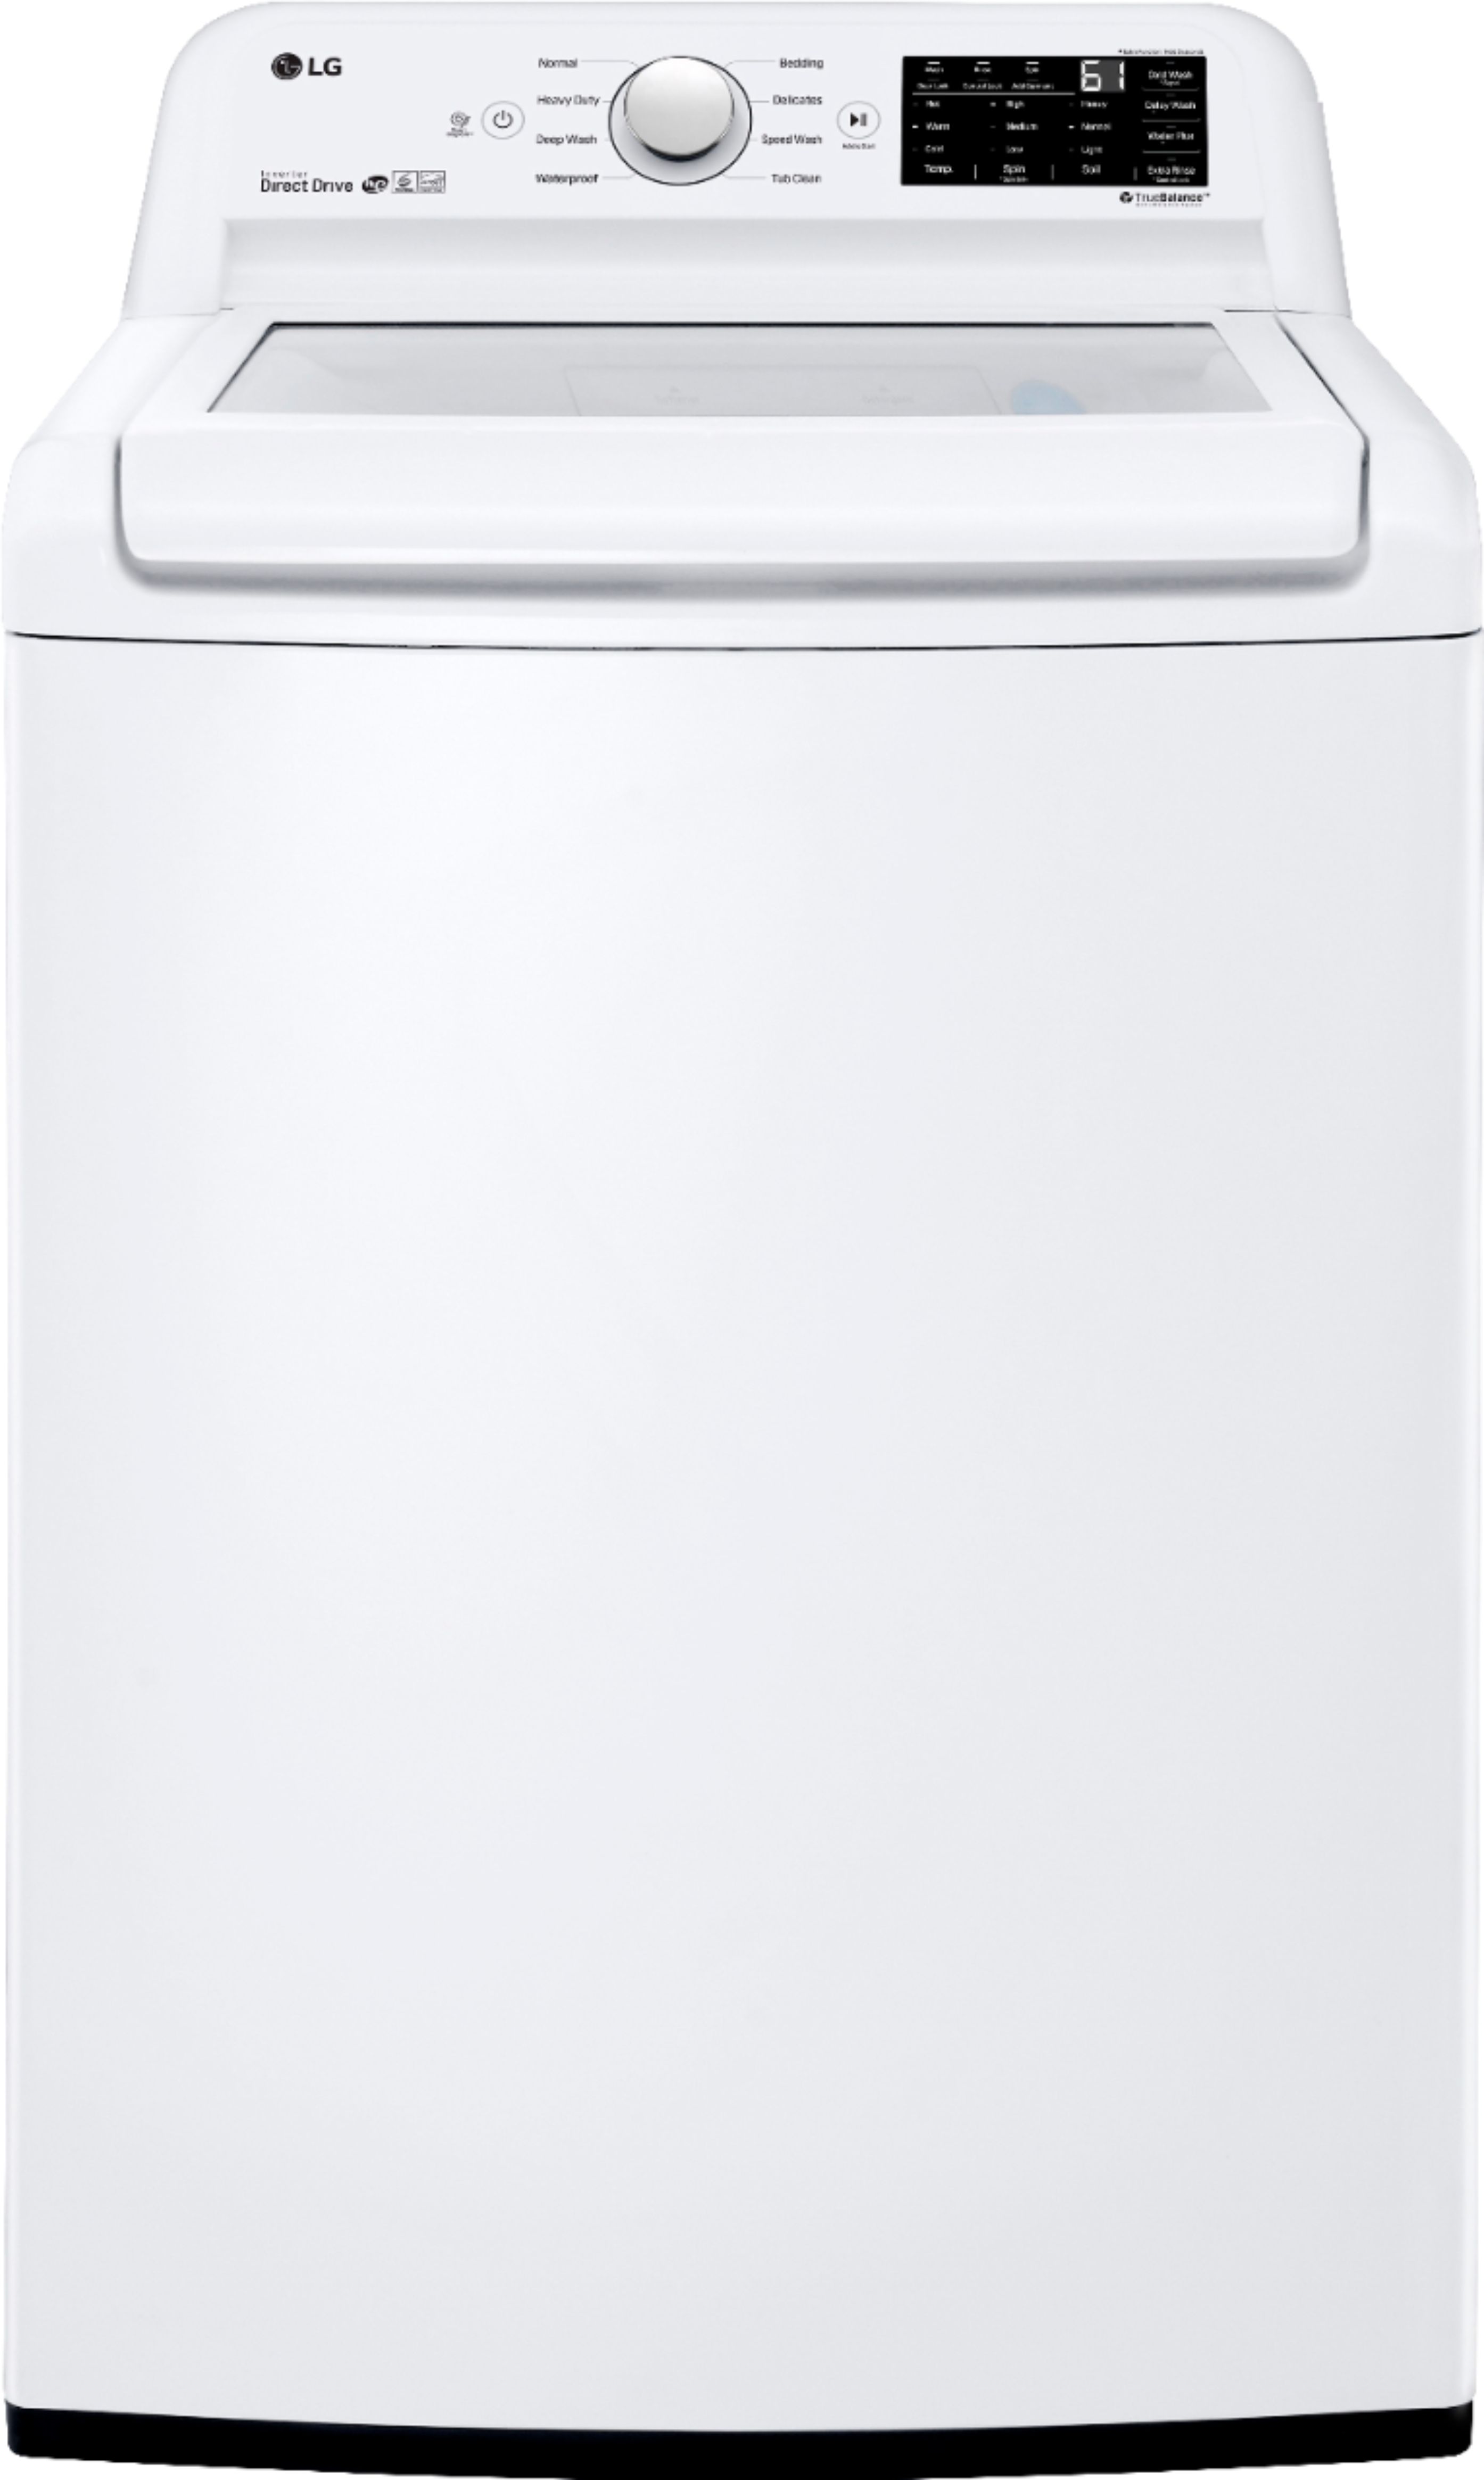 Customer Reviews Lg 4 5 Cu Ft 8 Cycle Top Loading Washer With 6motion Technology White Wt7100cw Best Buy